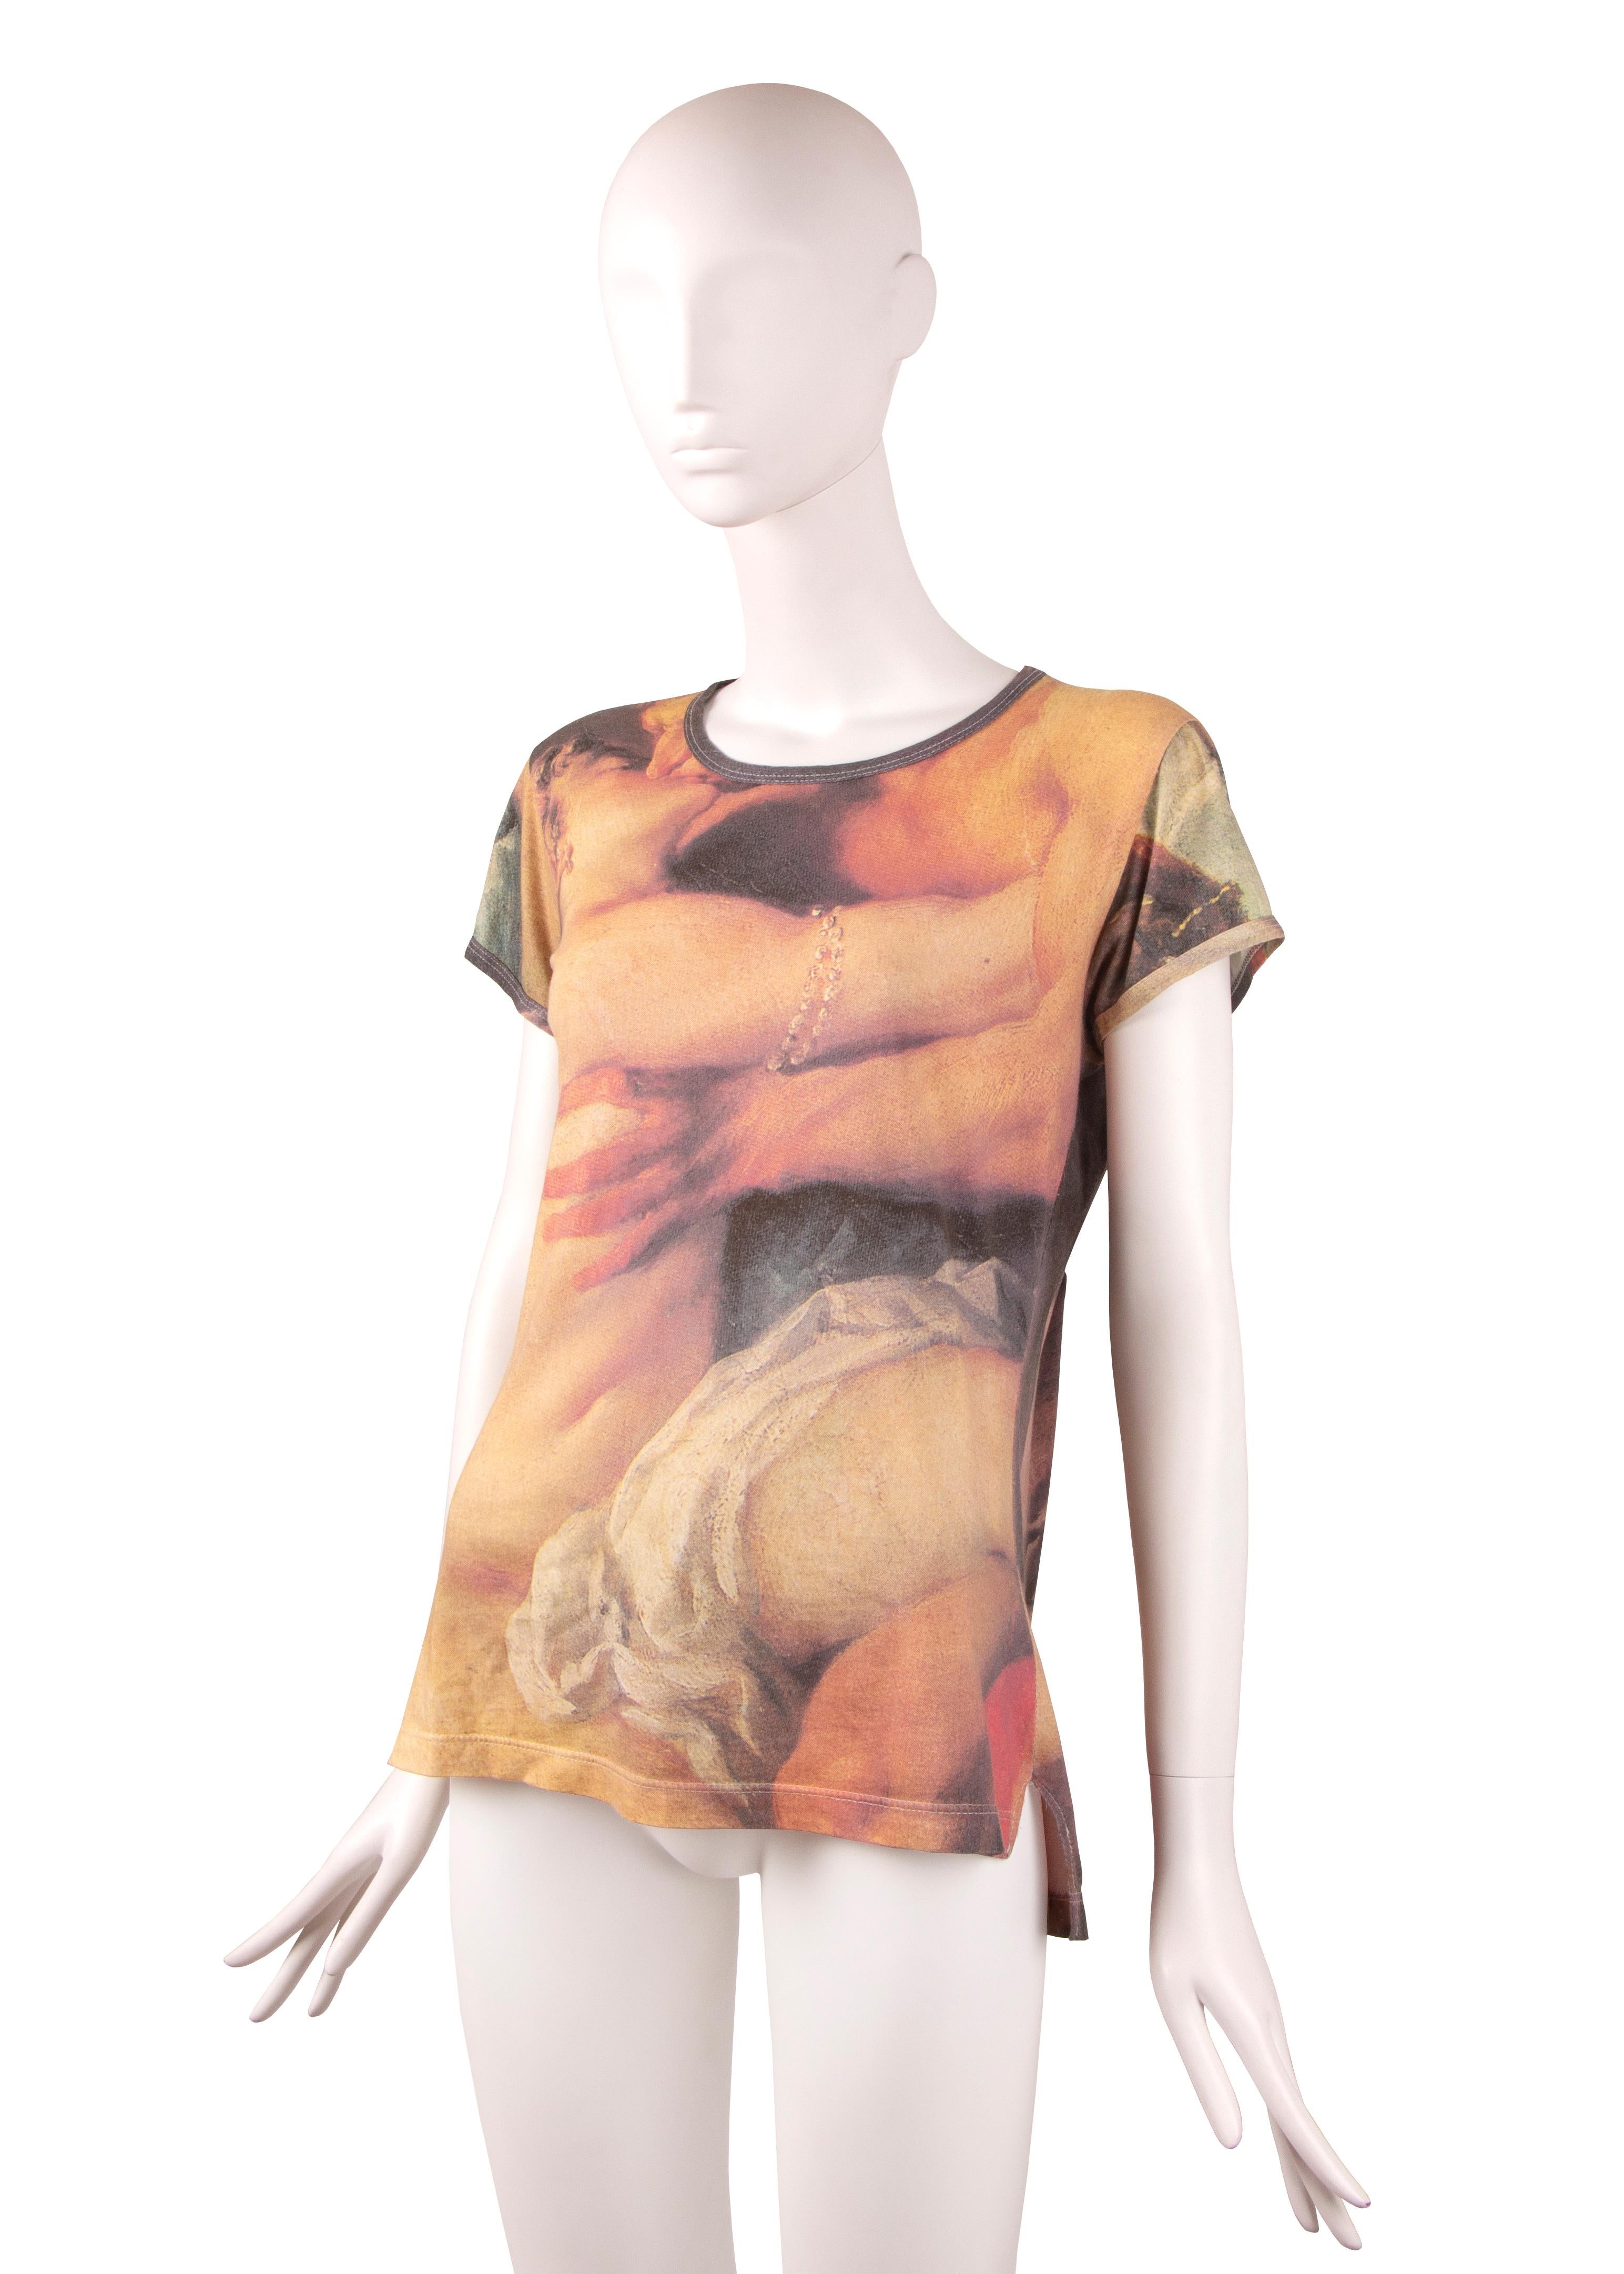 A Vivienne Westwood “Grand Hotel” T-shirt, Spring-Summer 1993. Similar to her portrait printed garments debuted in Autumn-Winter 1990, the painting ‘Hercules and Omphale’ by Francois Boucher (c. 1732-1734) is featured across the entirety of the